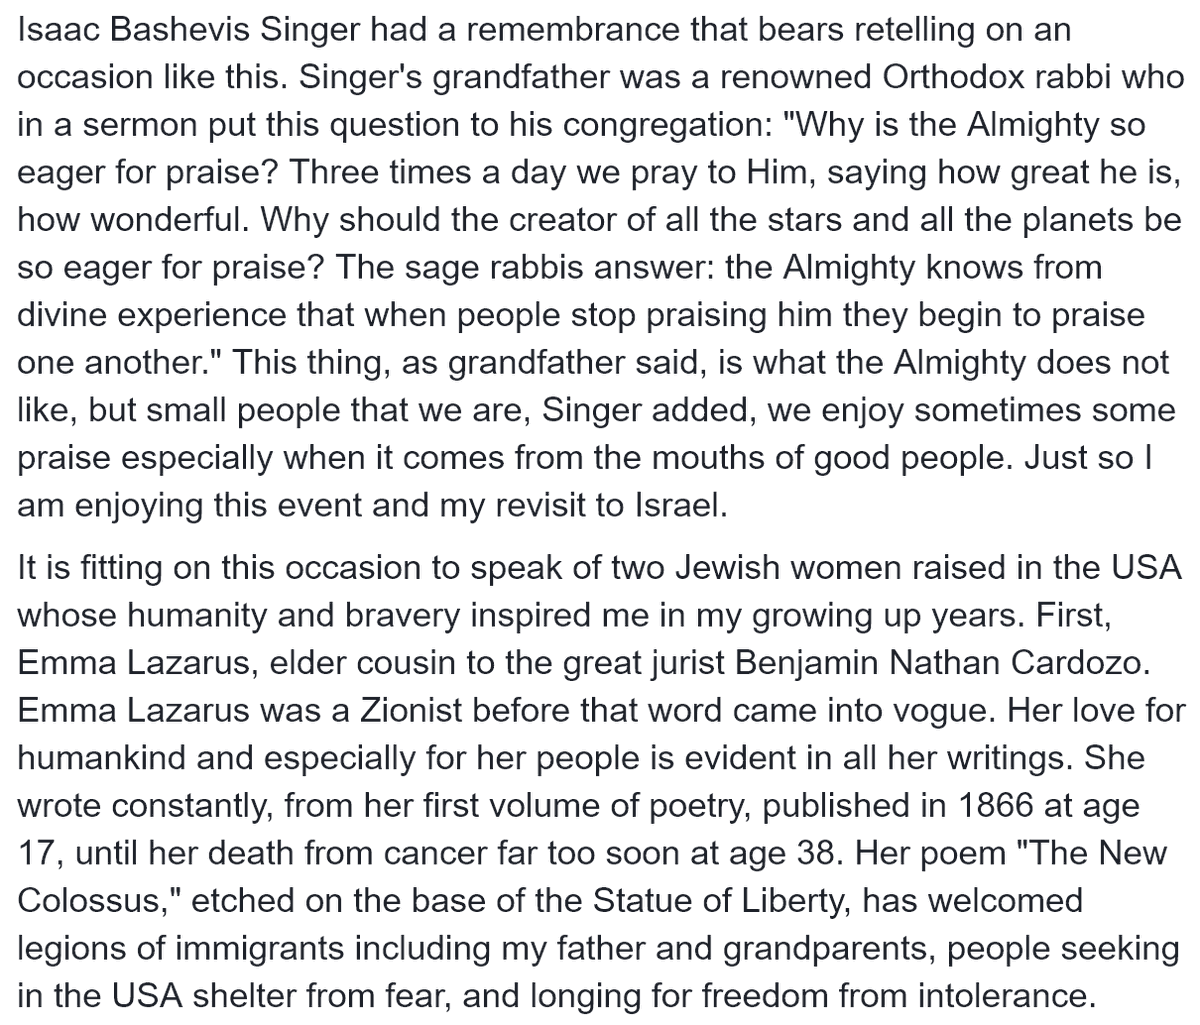 Instead of reading The Guardian's bizarre misreporting on Ruth Bader Ginsburg's Jewishness, I recommend instead reading this remarkable speech she delivered in 2018 in Israel about her Jewish identity and commitments: